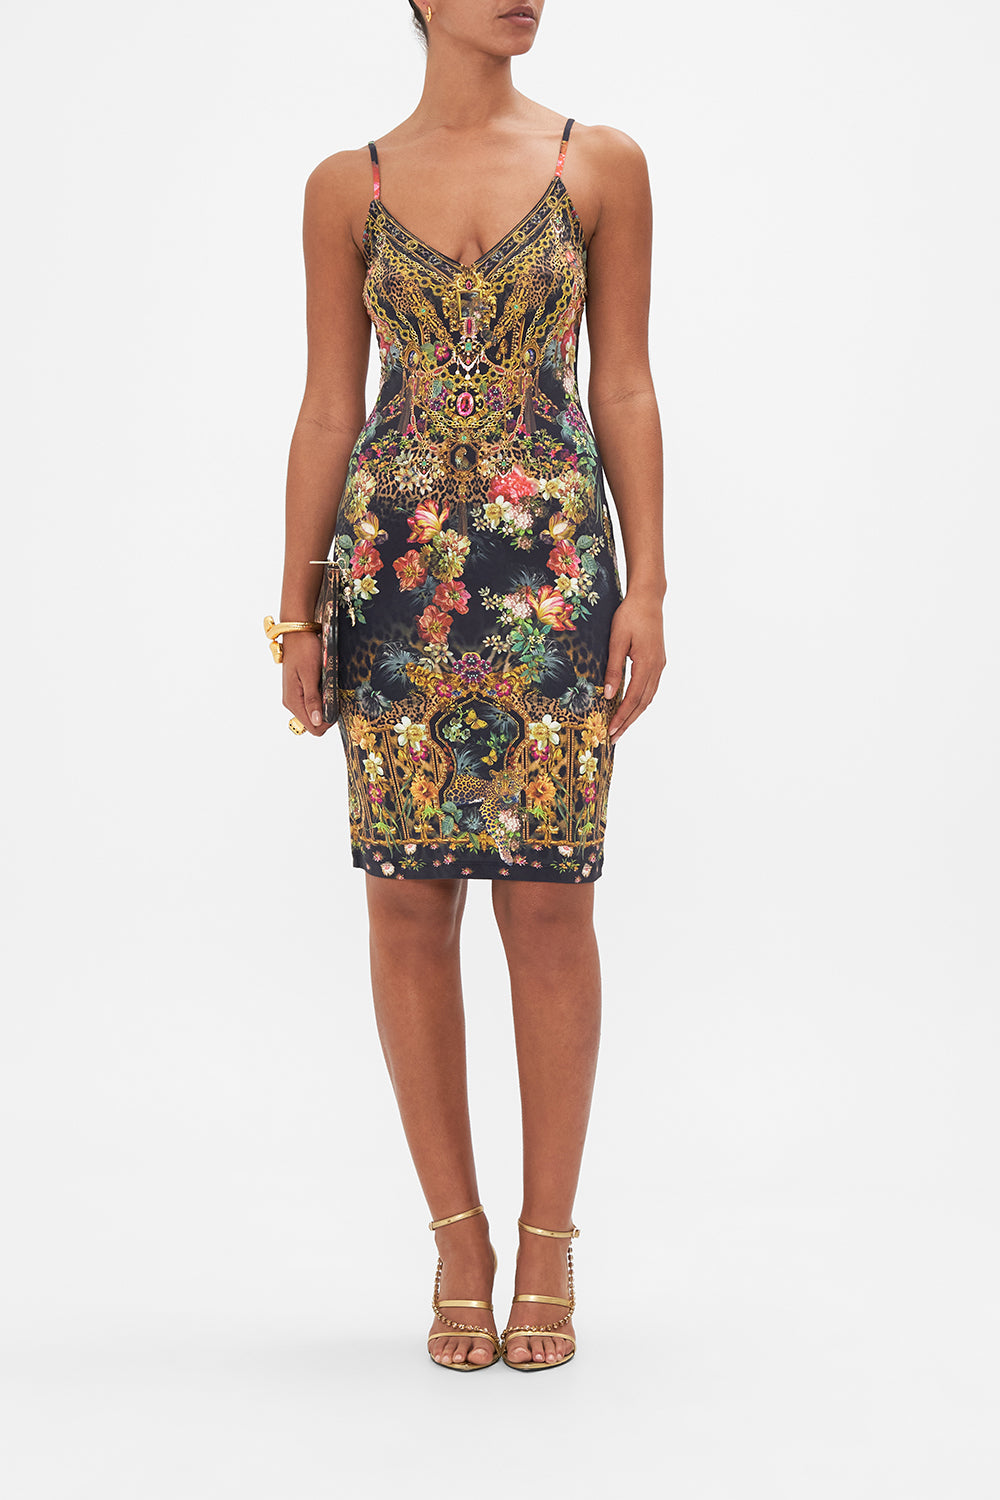 Front view of model weraing CAMILLA floral print slip dress in A Night At The Opera print